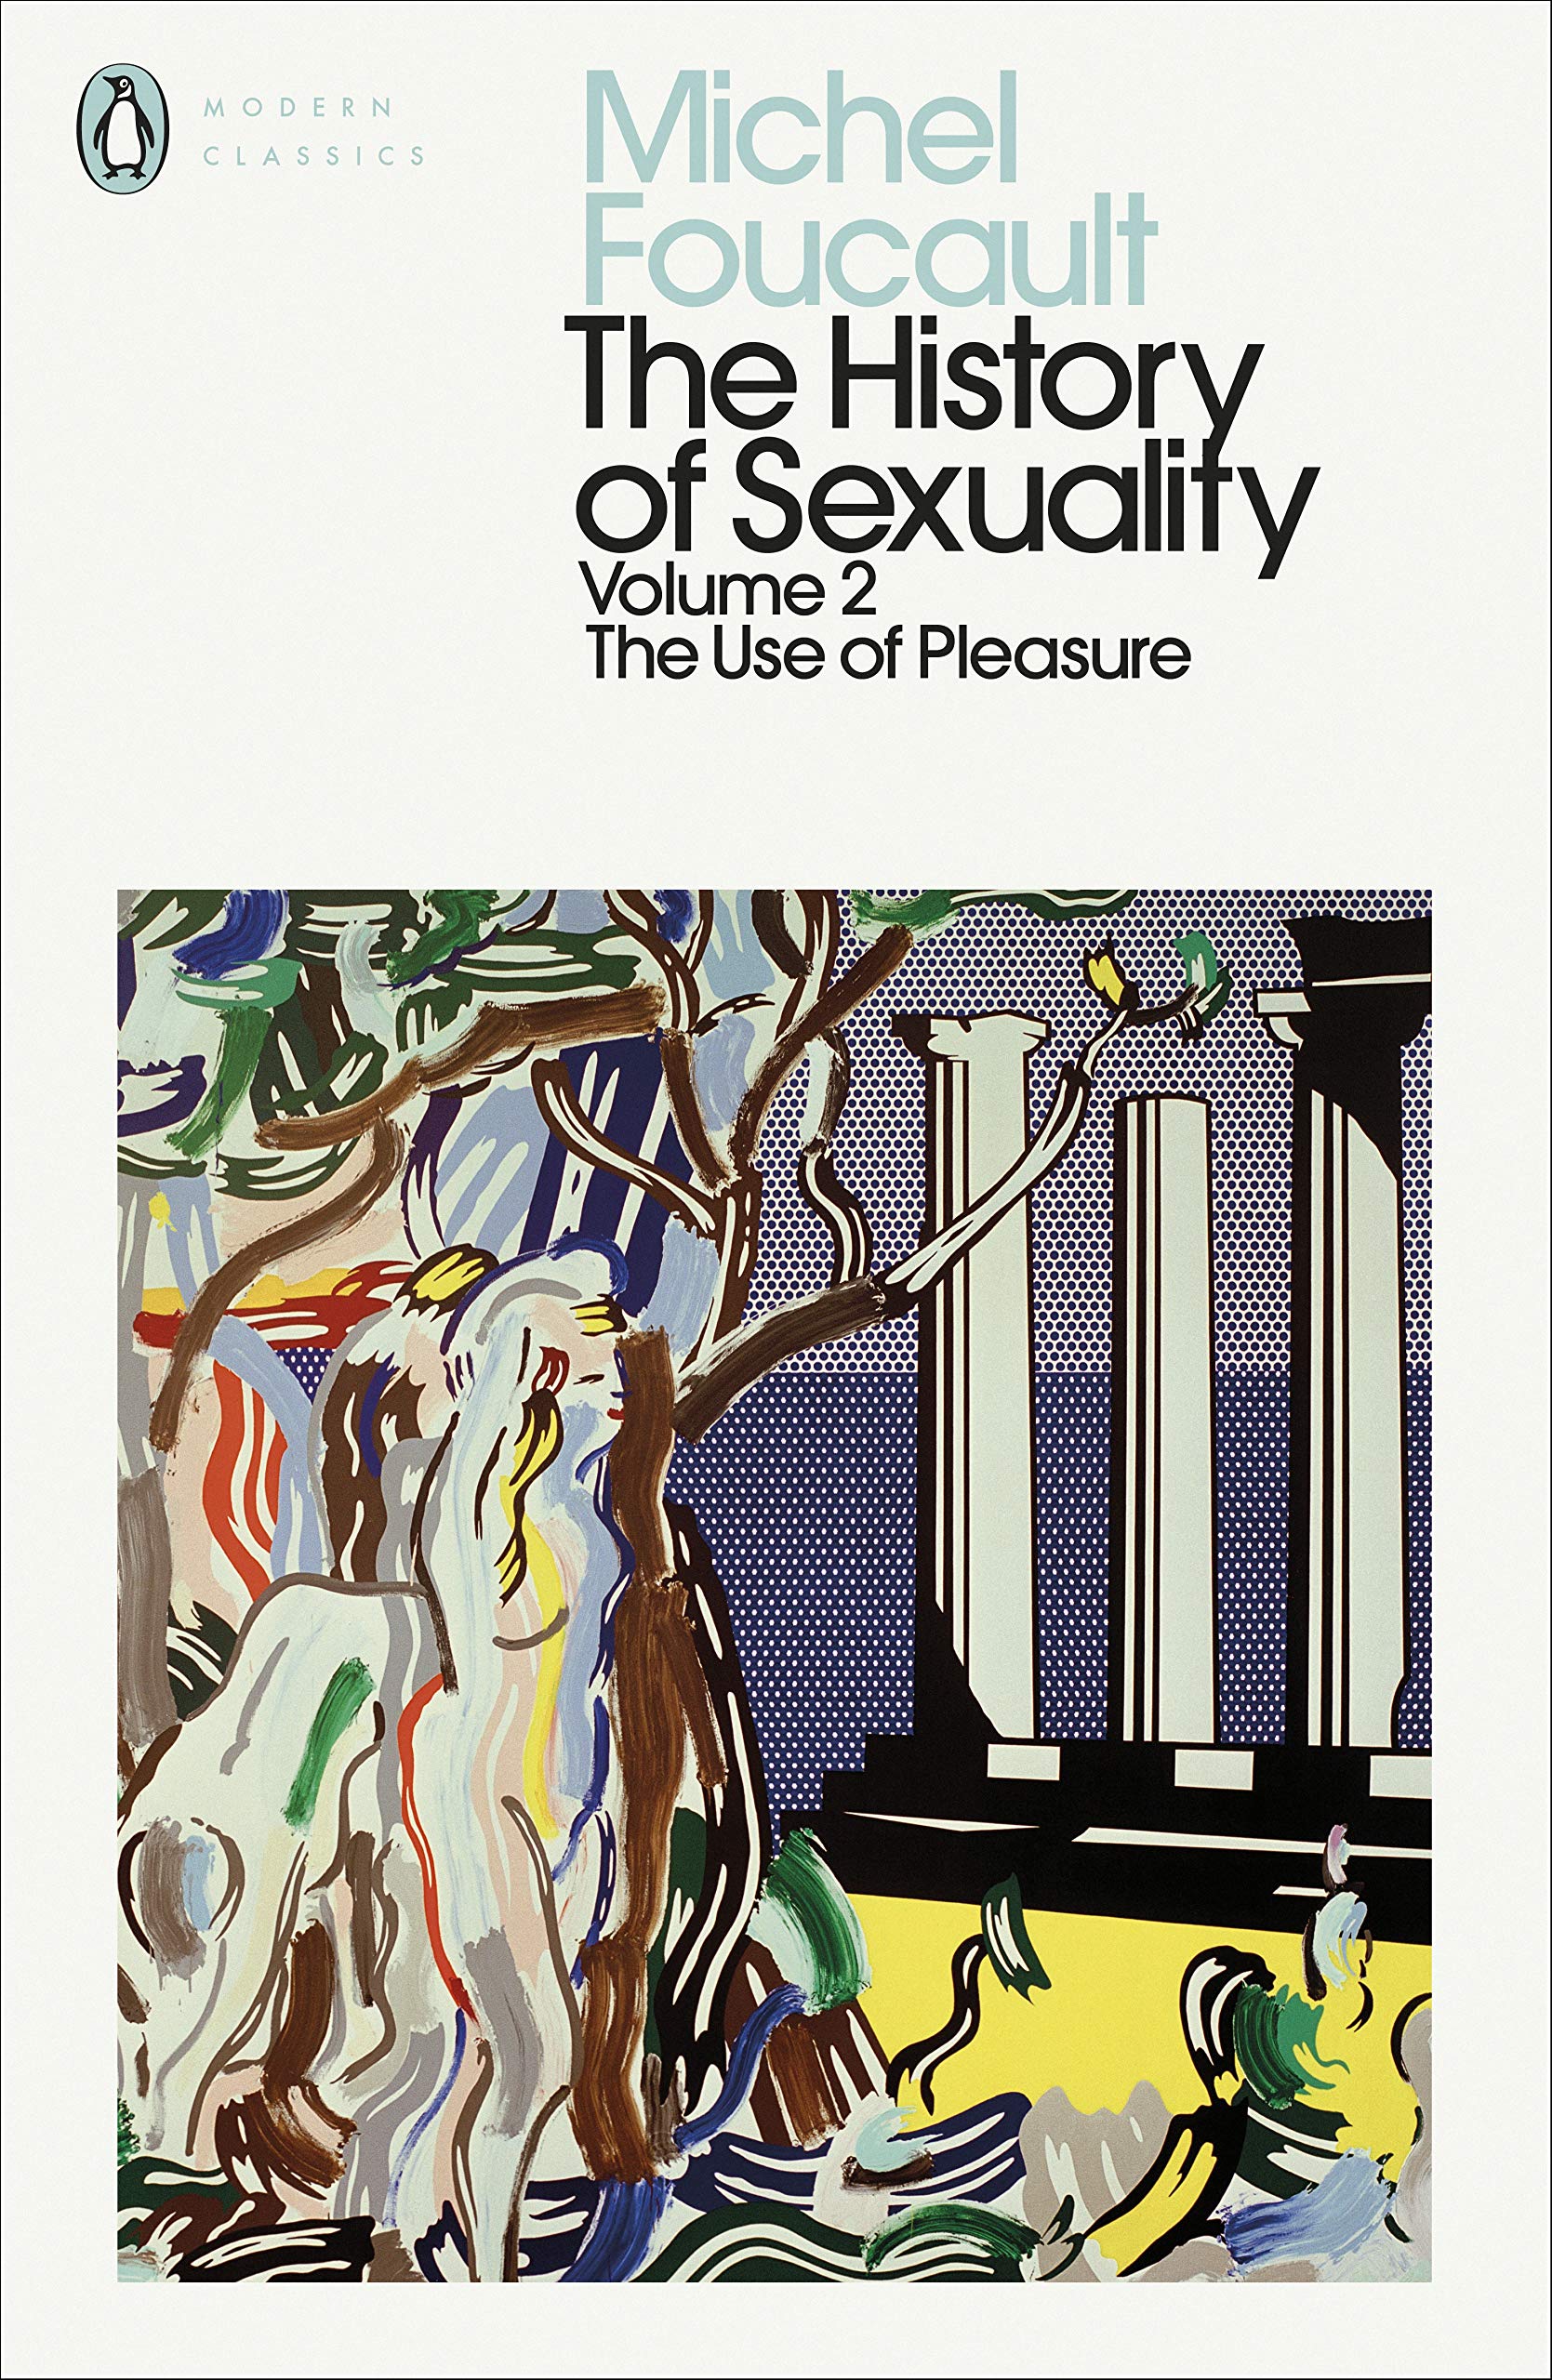 The History of Sexuality. Vol. 2. The Use of Pleasure